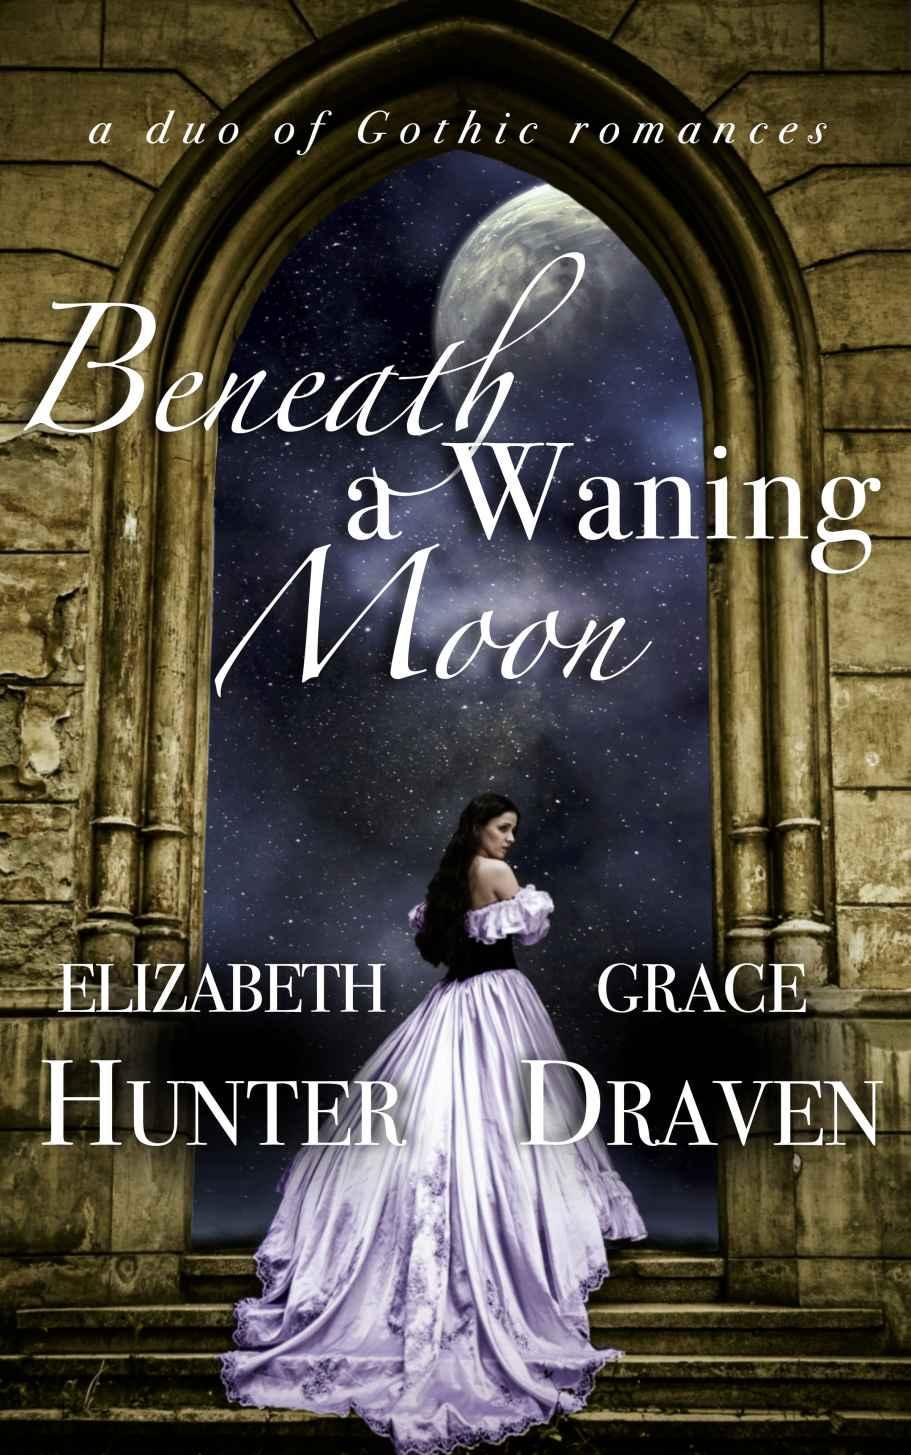 Beneath a Waning Moon: A Duo of Gothic Romances